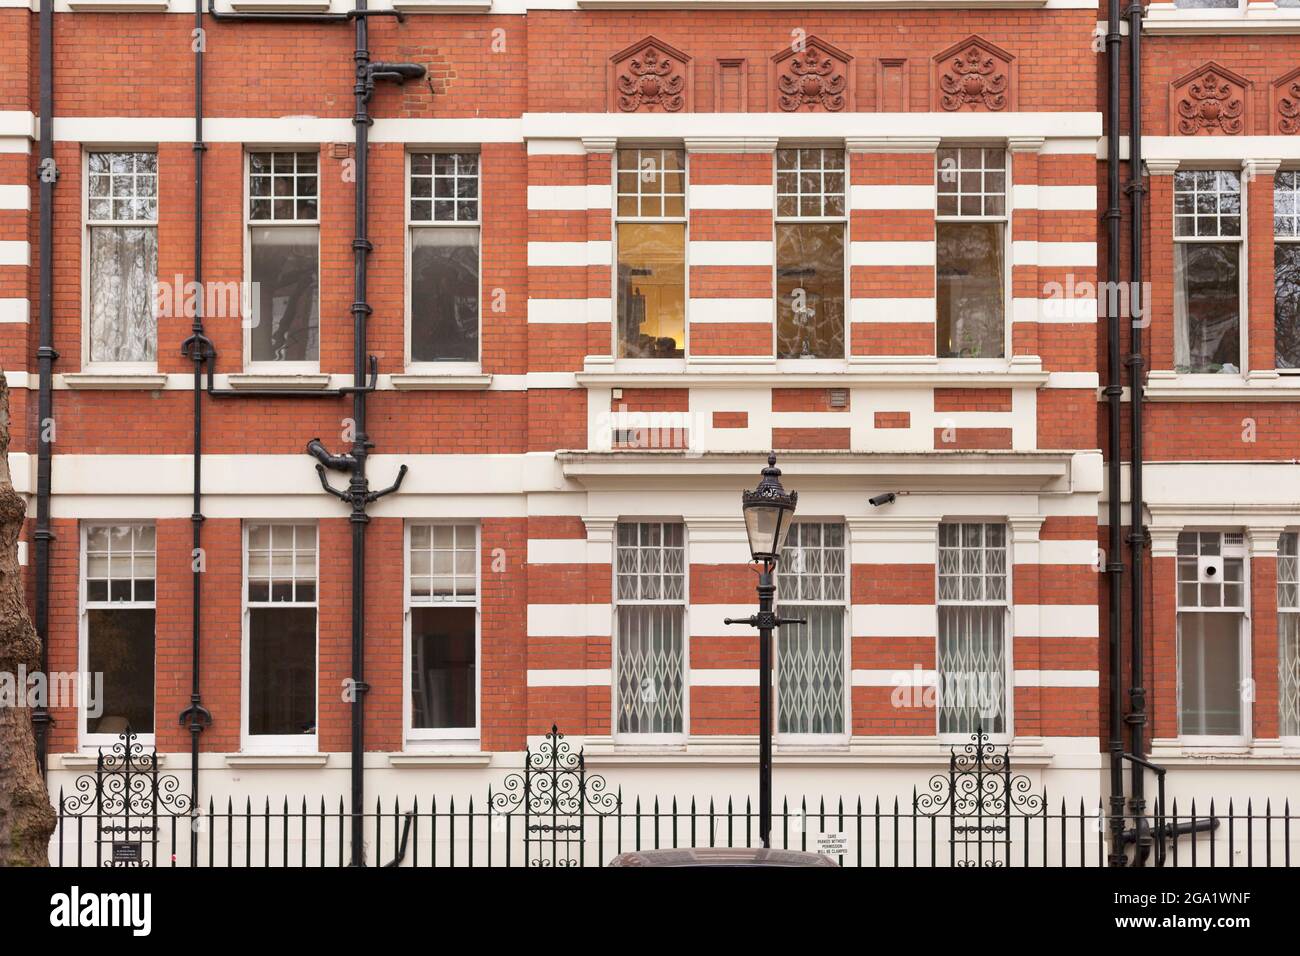 Edwardian apartments on 'Imperial college Rd' in Kensington, London, UK Stock Photo